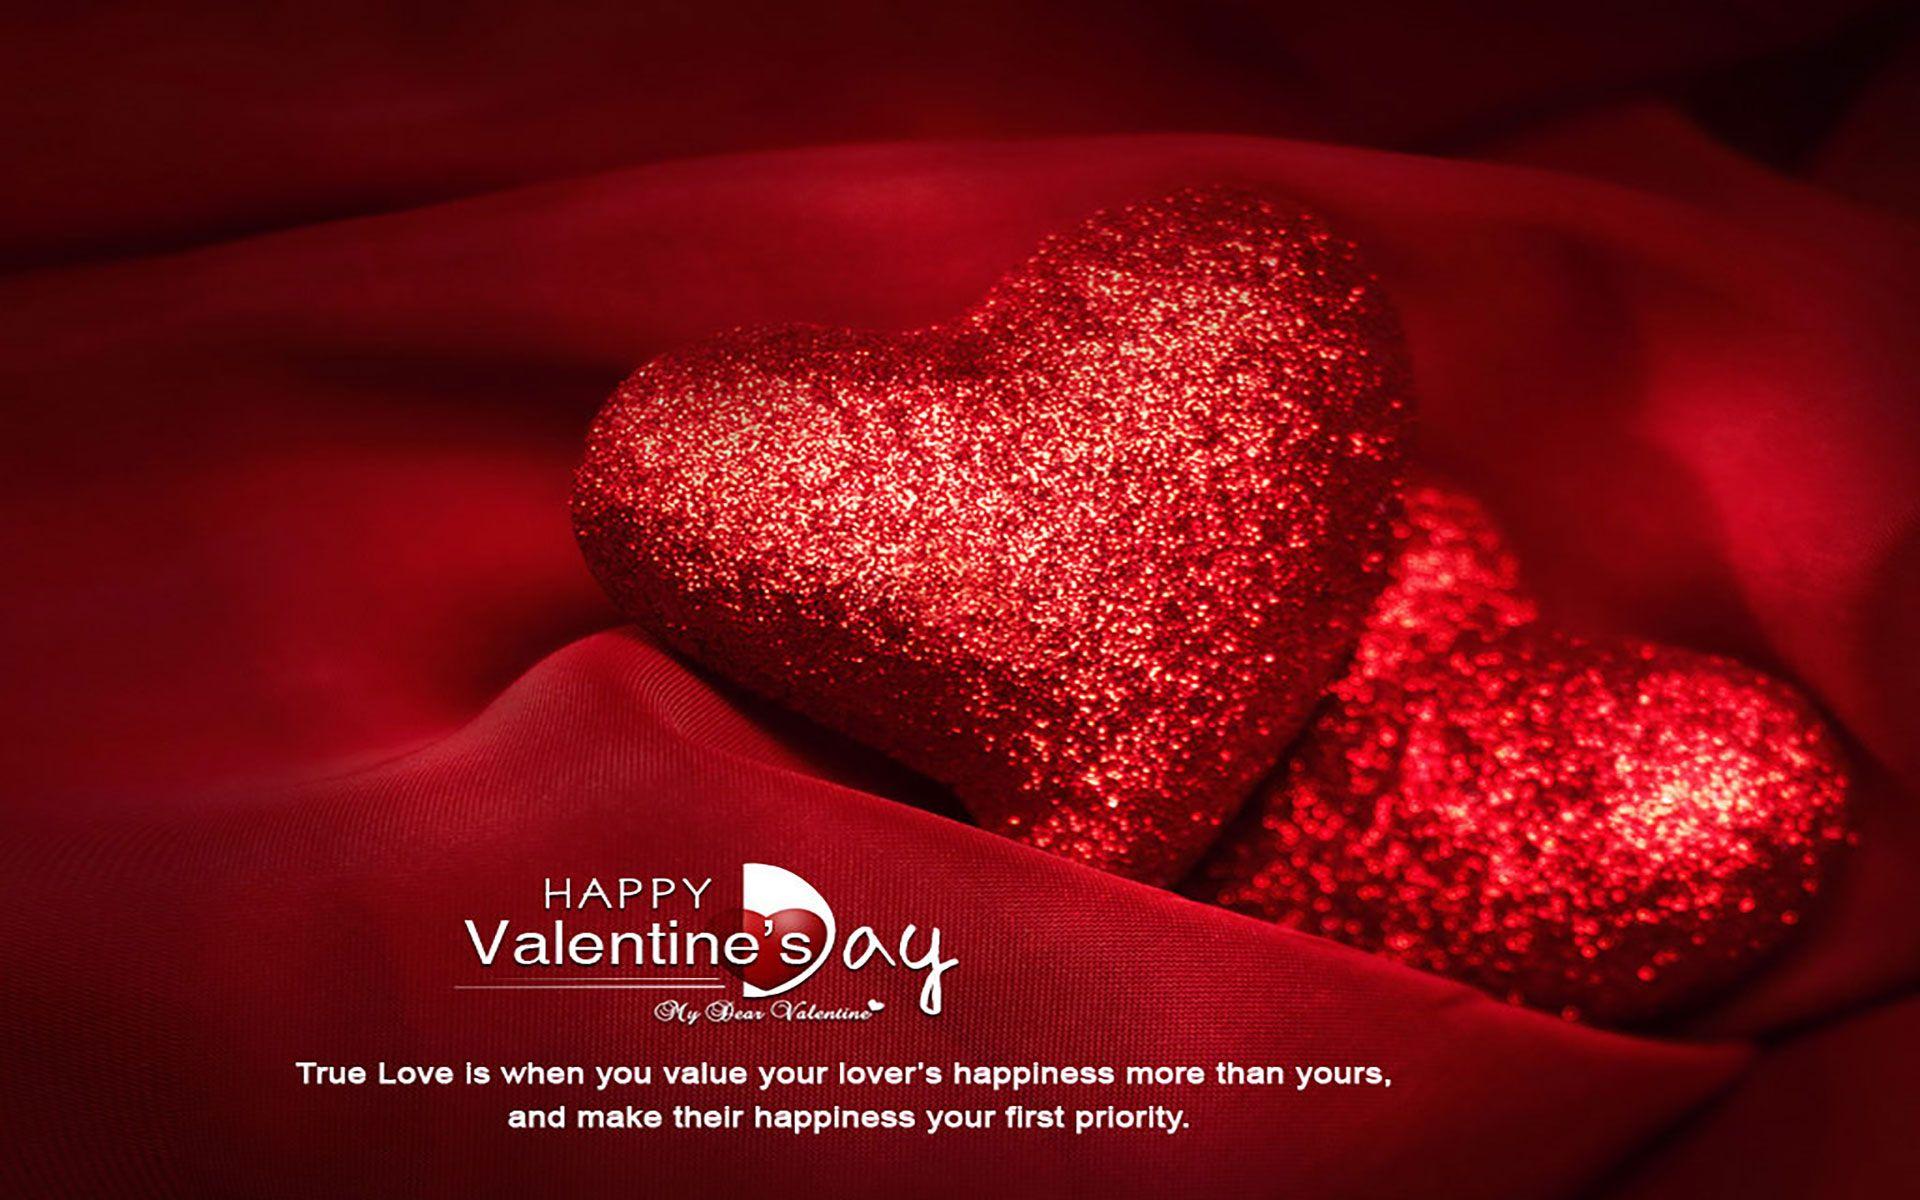 Happy Valentine's Day Image for Free Download